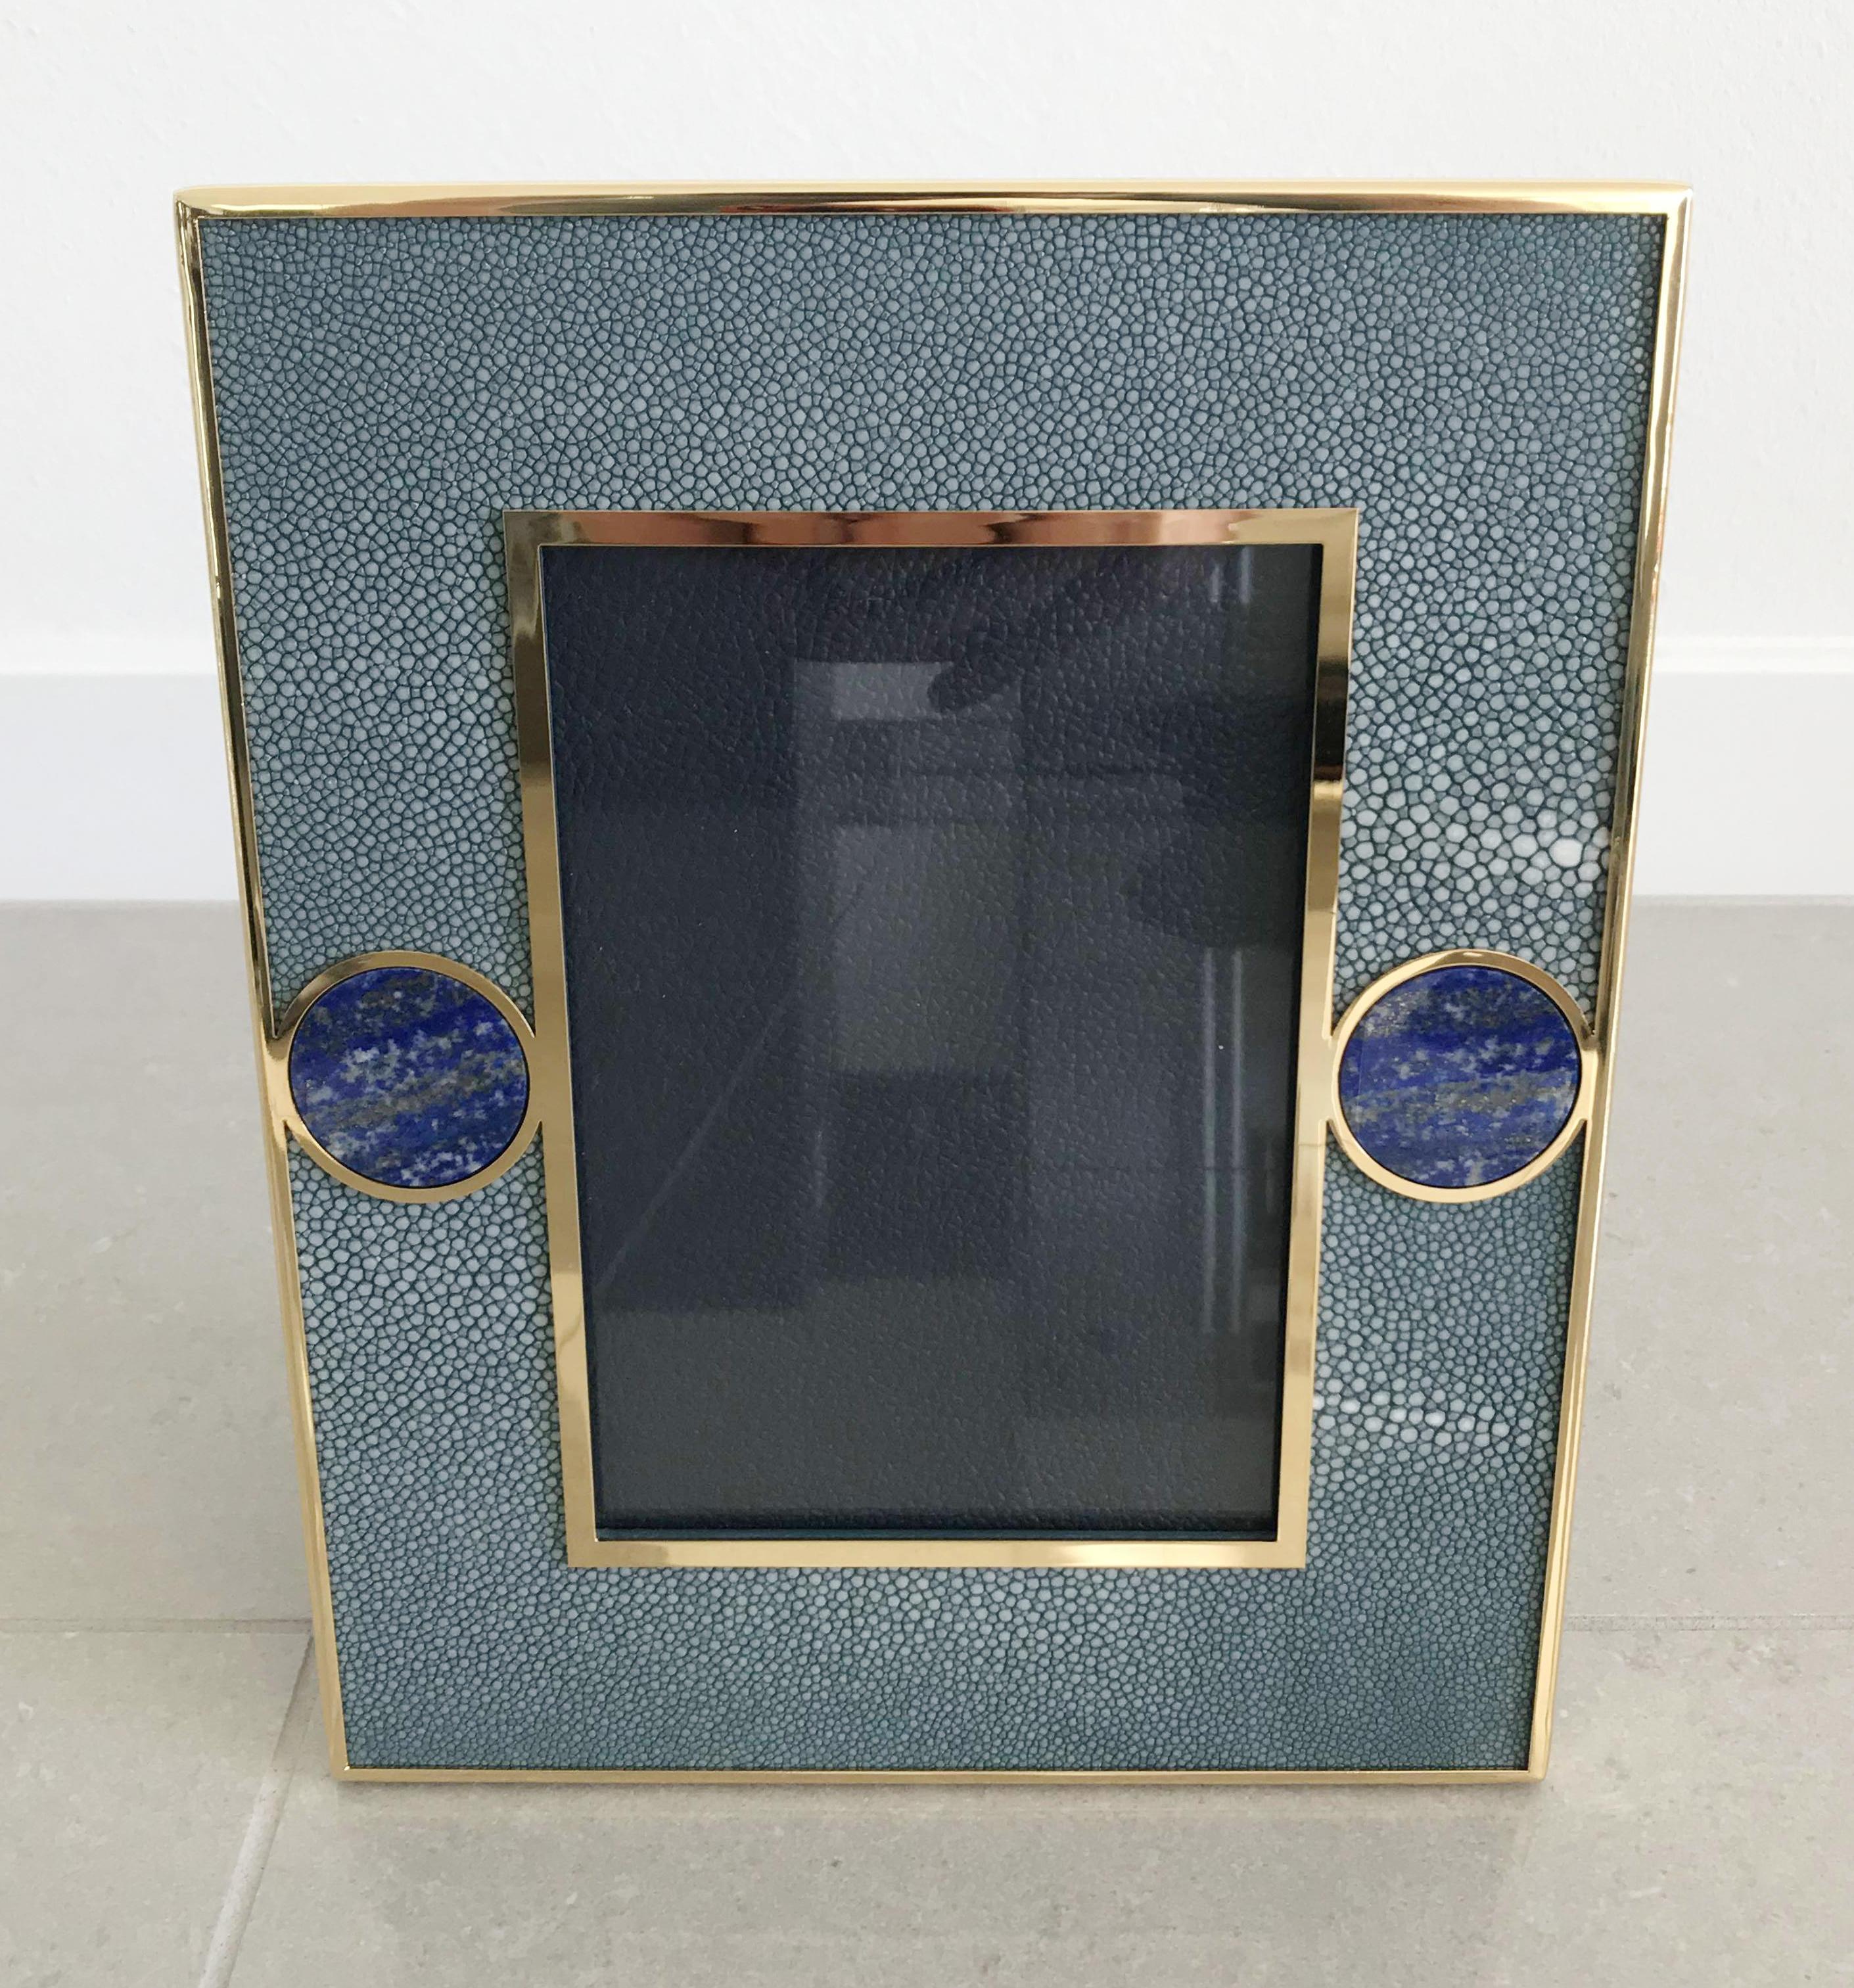 Blue shagreen leather with Lapis Lazuli inserts and gold-plated picture frame by Fabio Ltd
Measures: Height 10.5 inches, width 8.5 inches, depth 1 inch
Photo size: 5 inches by 7 inches
LAST 1 in stock in Los Angeles
Order Reference #: FABIOLTD